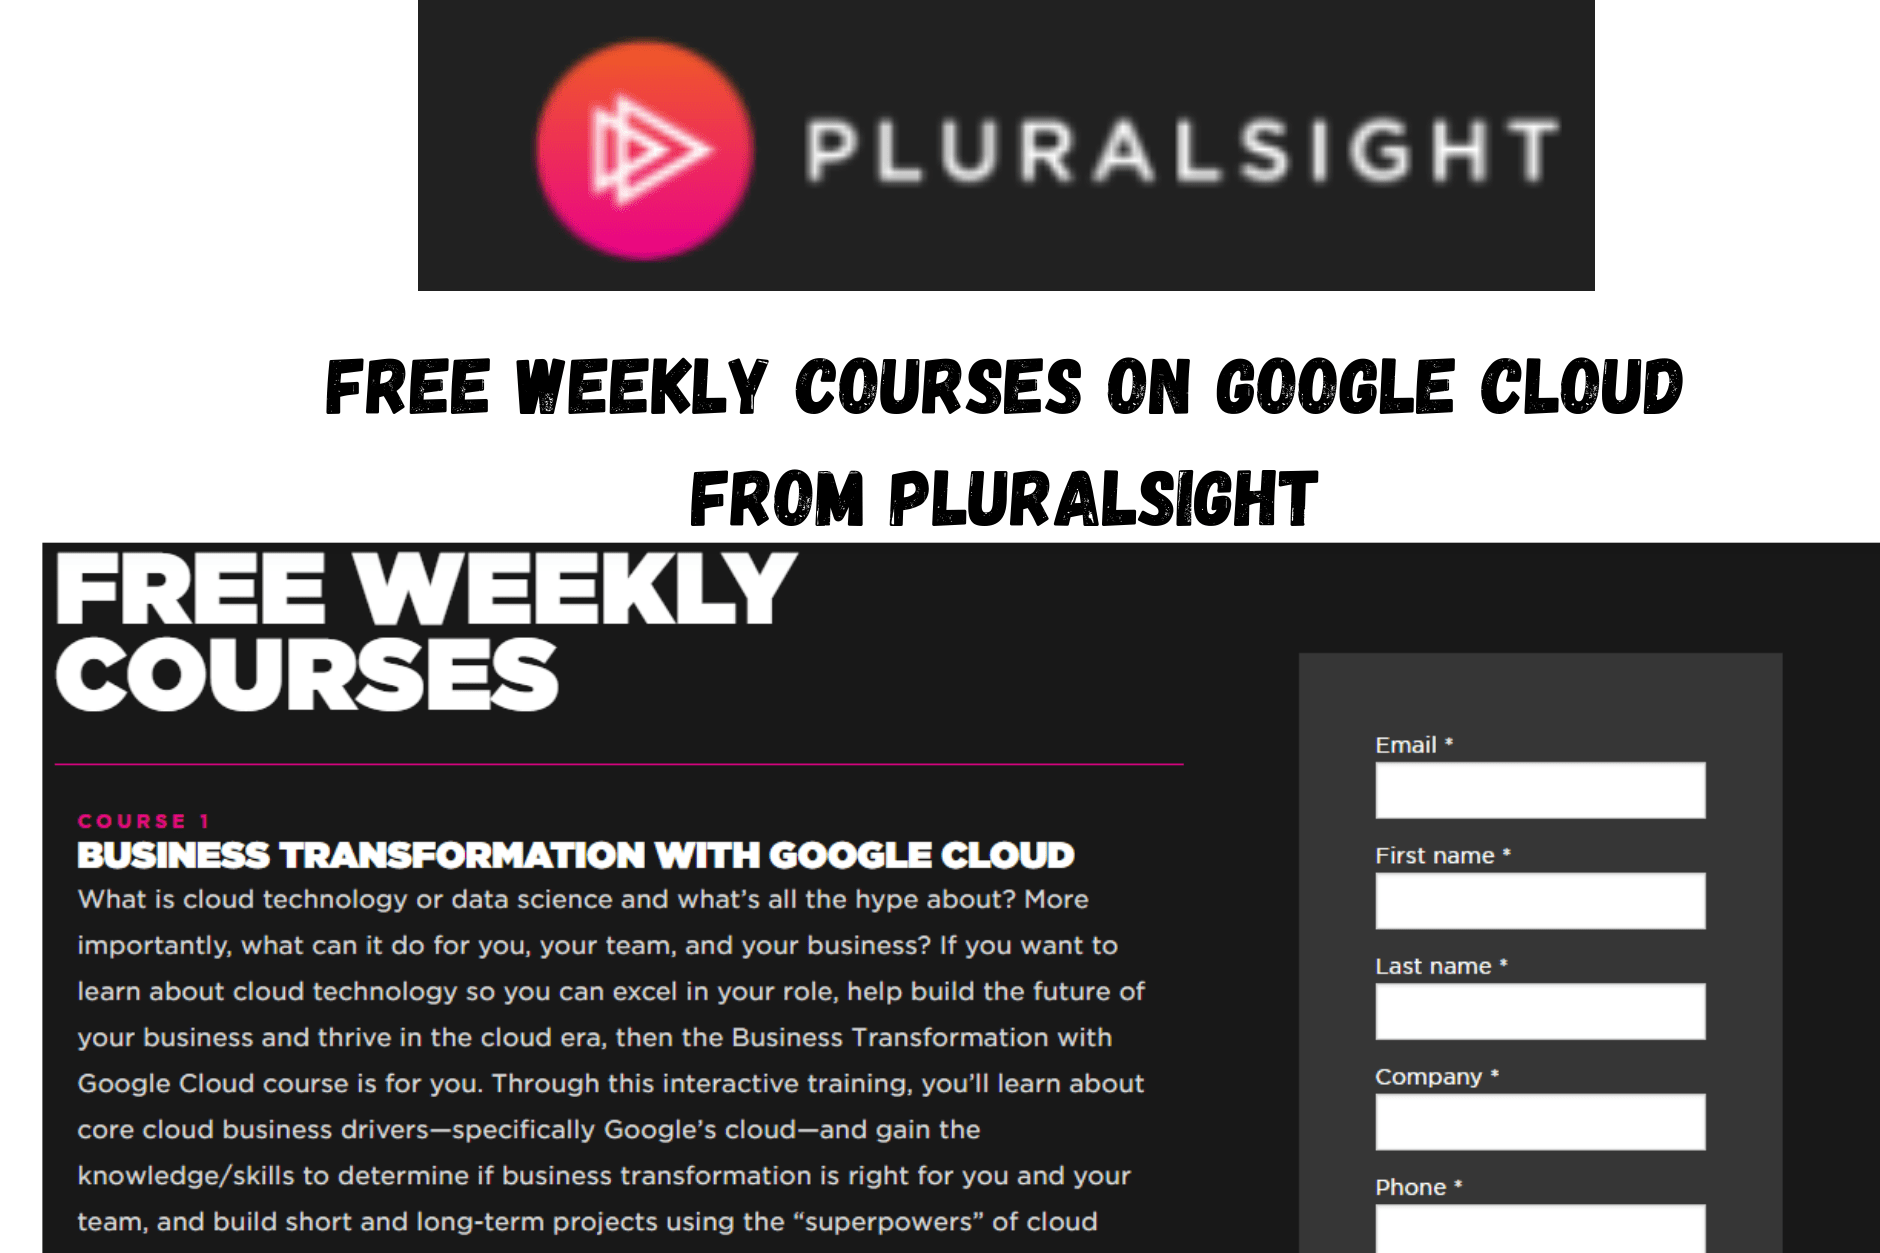 Pluralsight FREE WEEKLY COURSES